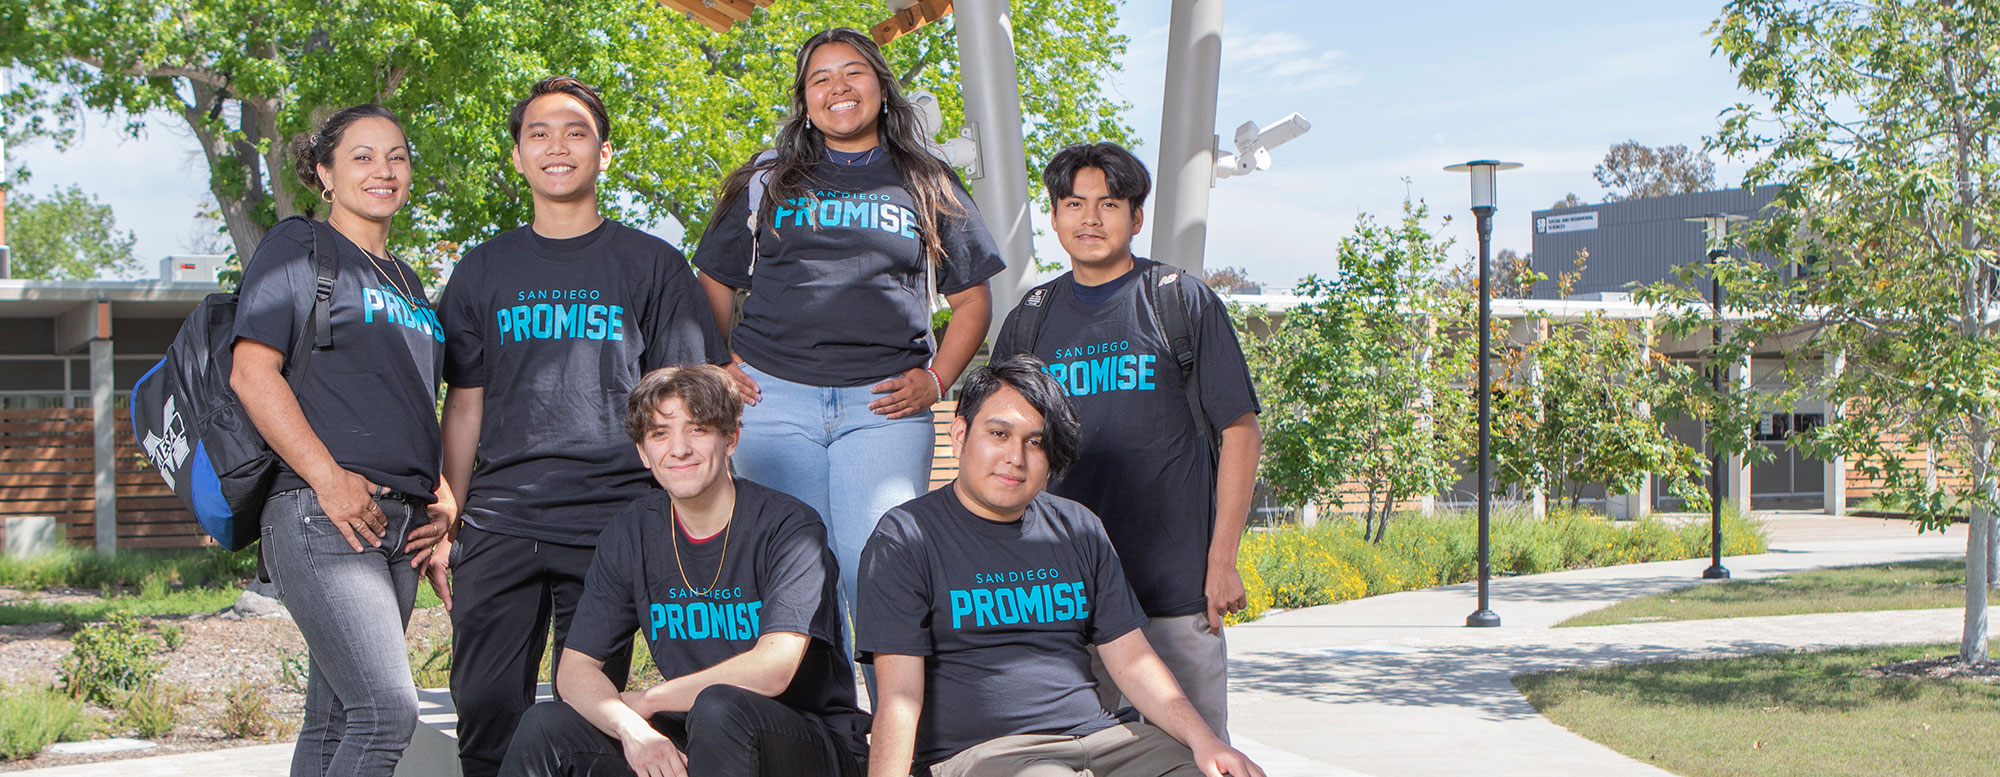 Six students wearing San Diego Promise t-shirts pose for a group photo outside on the grass in the Mesa Quad